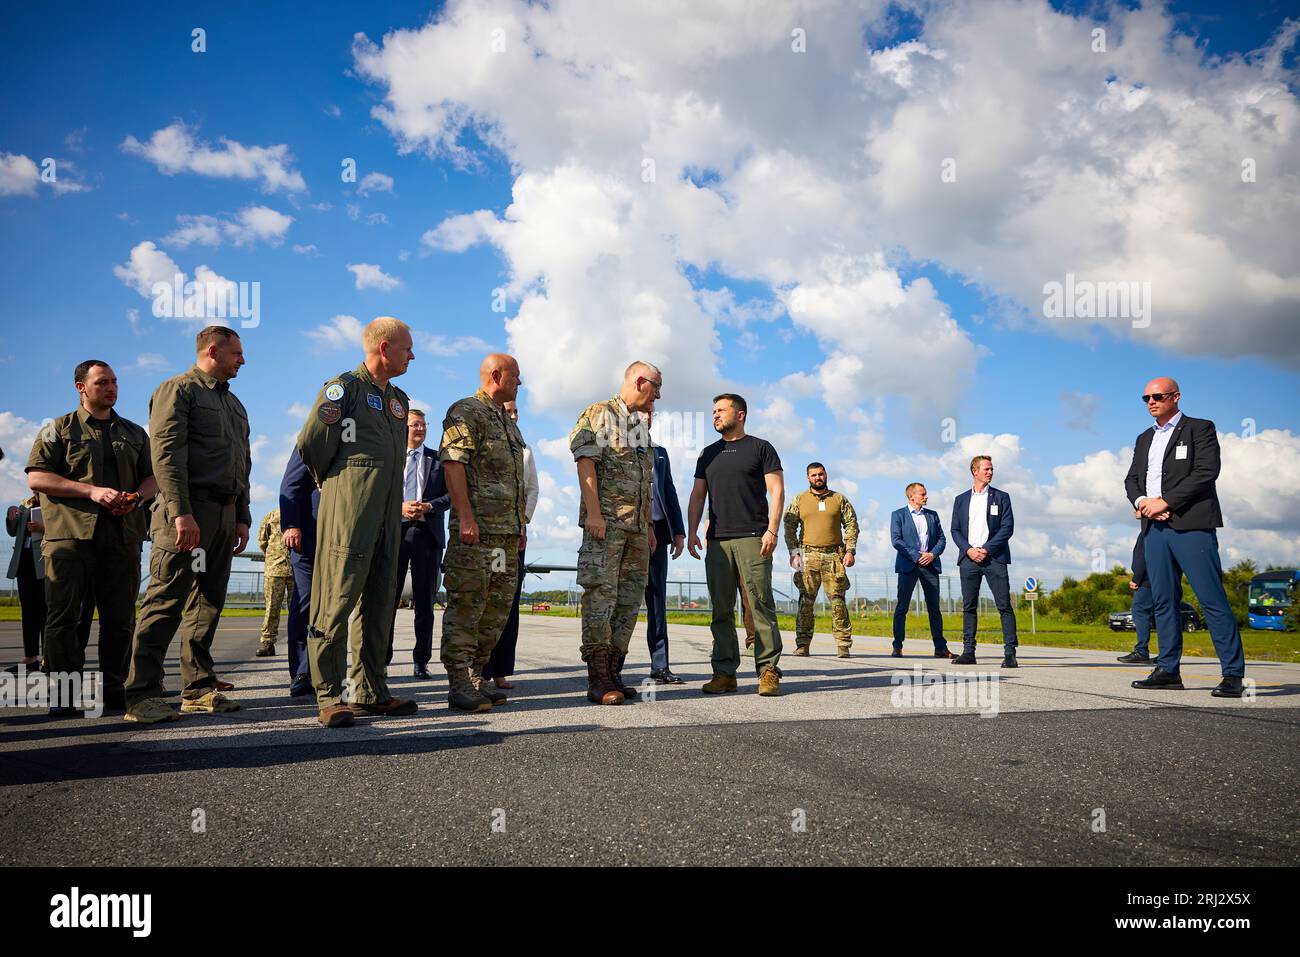 During a working visit to the Kingdom of Denmark, the President of Ukraine, Volodymyr Zelensky ,visited the Fighter Wing Skrydstrup air base of the Royal Danish Air Force.   Accompanied by Prime Minister of Denmark Mette Frederiksen and the Royal Air Force Command, the Head of State familiarized himself with the technical features of F-16 Fighting Falcon jets and the training program for Ukrainian pilots on these aircraft.  He spoke with Ukrainian pilots who are undergoing training on F-16s to protect Ukrainian skies. Stock Photo